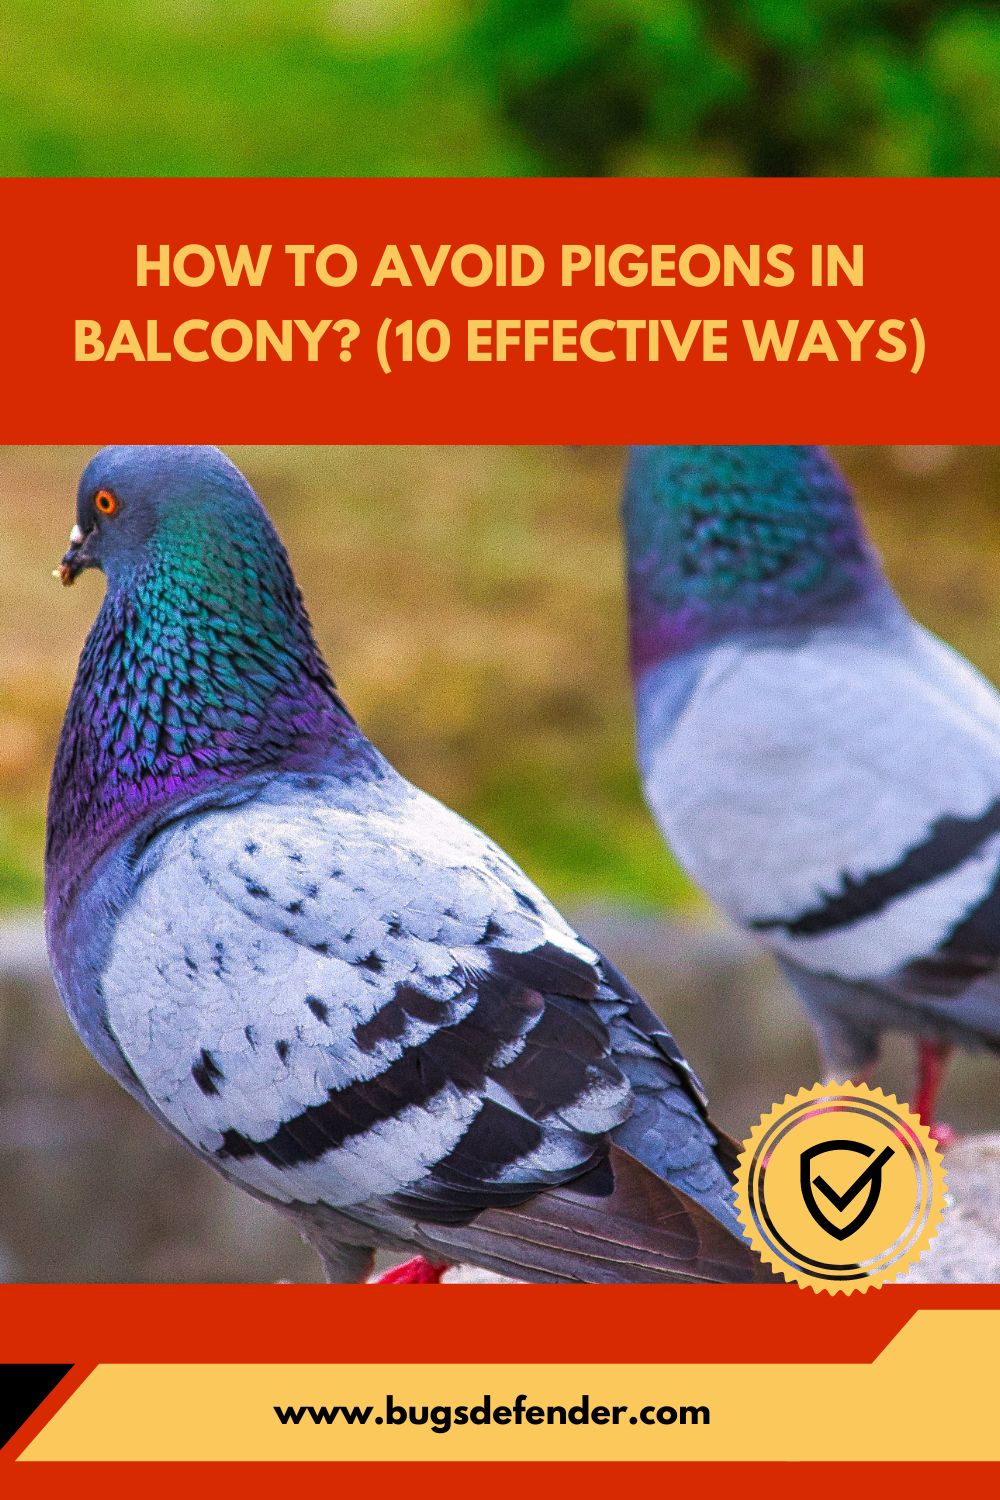 How To Avoid Pigeons In Balcony (10 Effective Ways) pin1